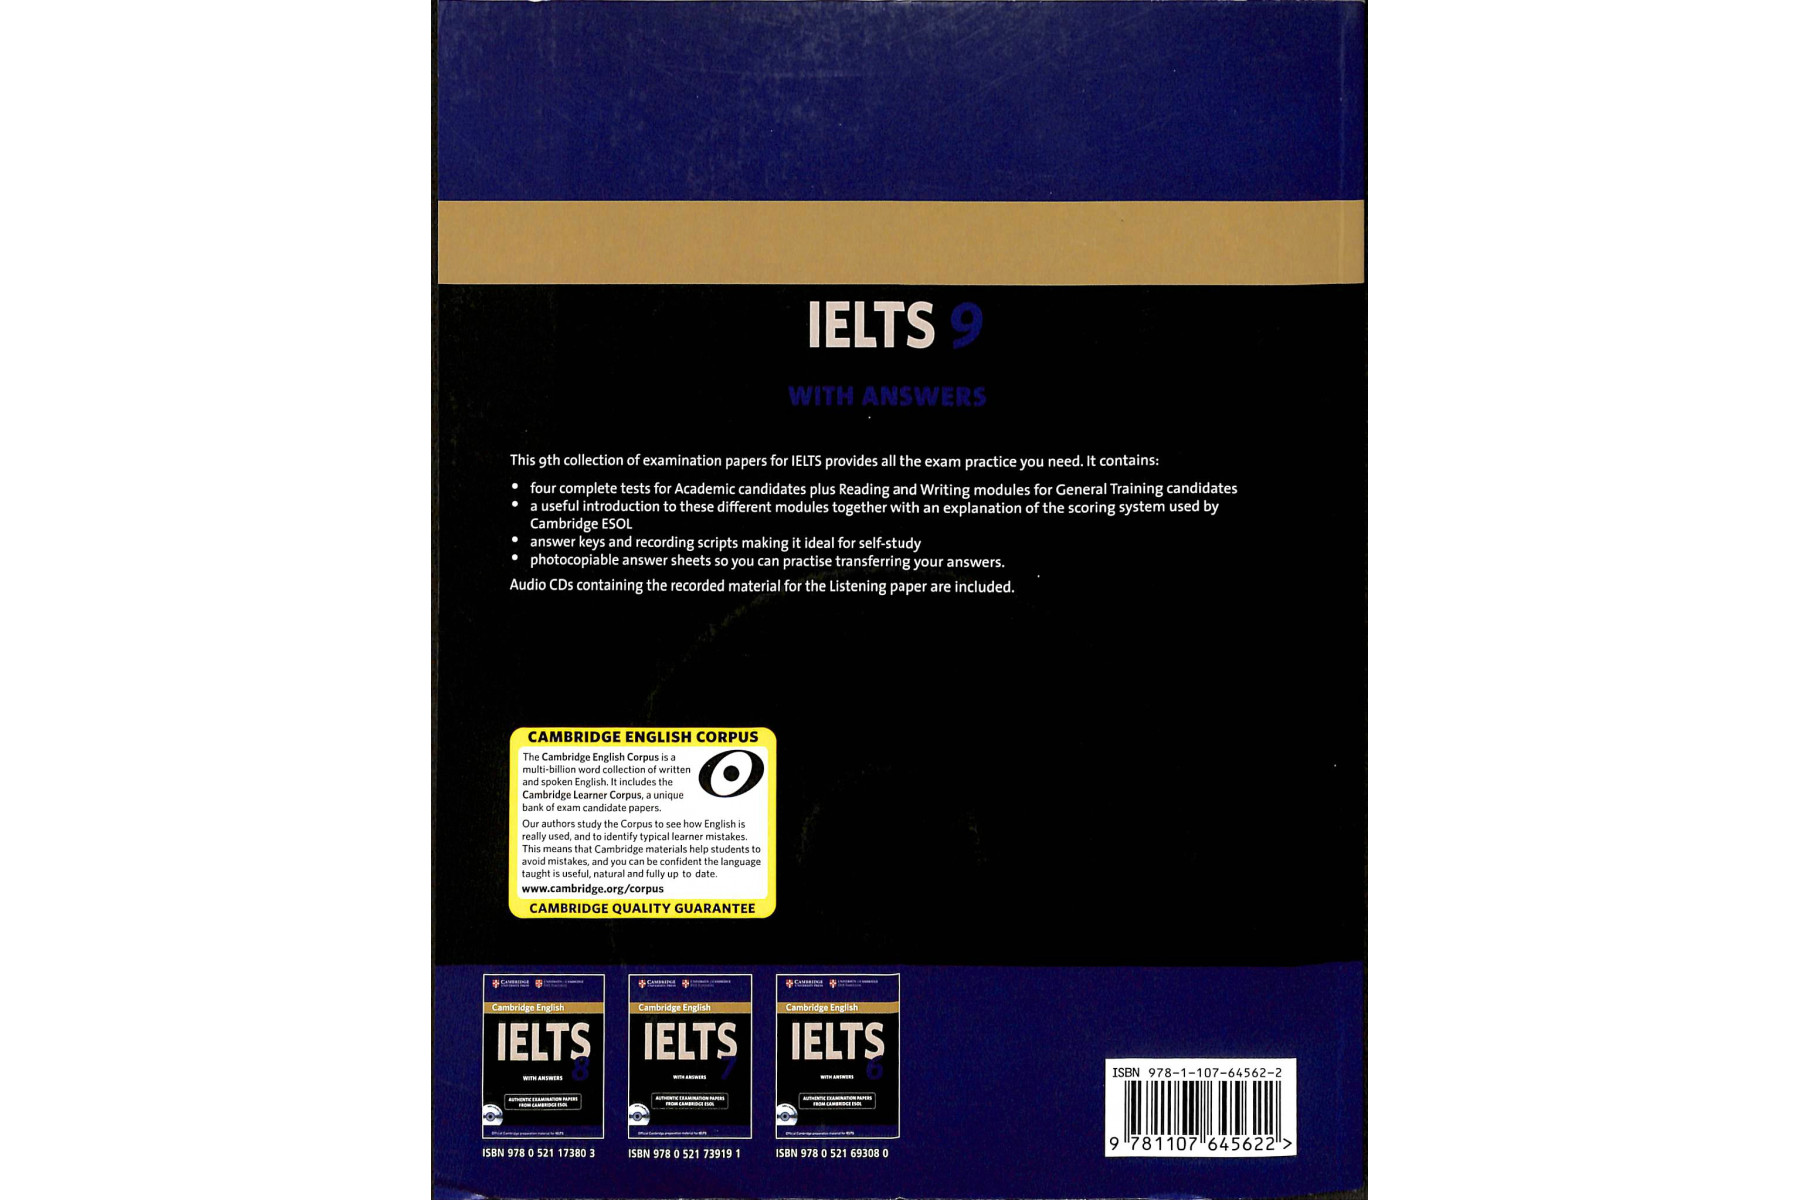 Cambridge IELTS 9 Self-study Pack (Student's Book with Answers and Audio CDs (2))